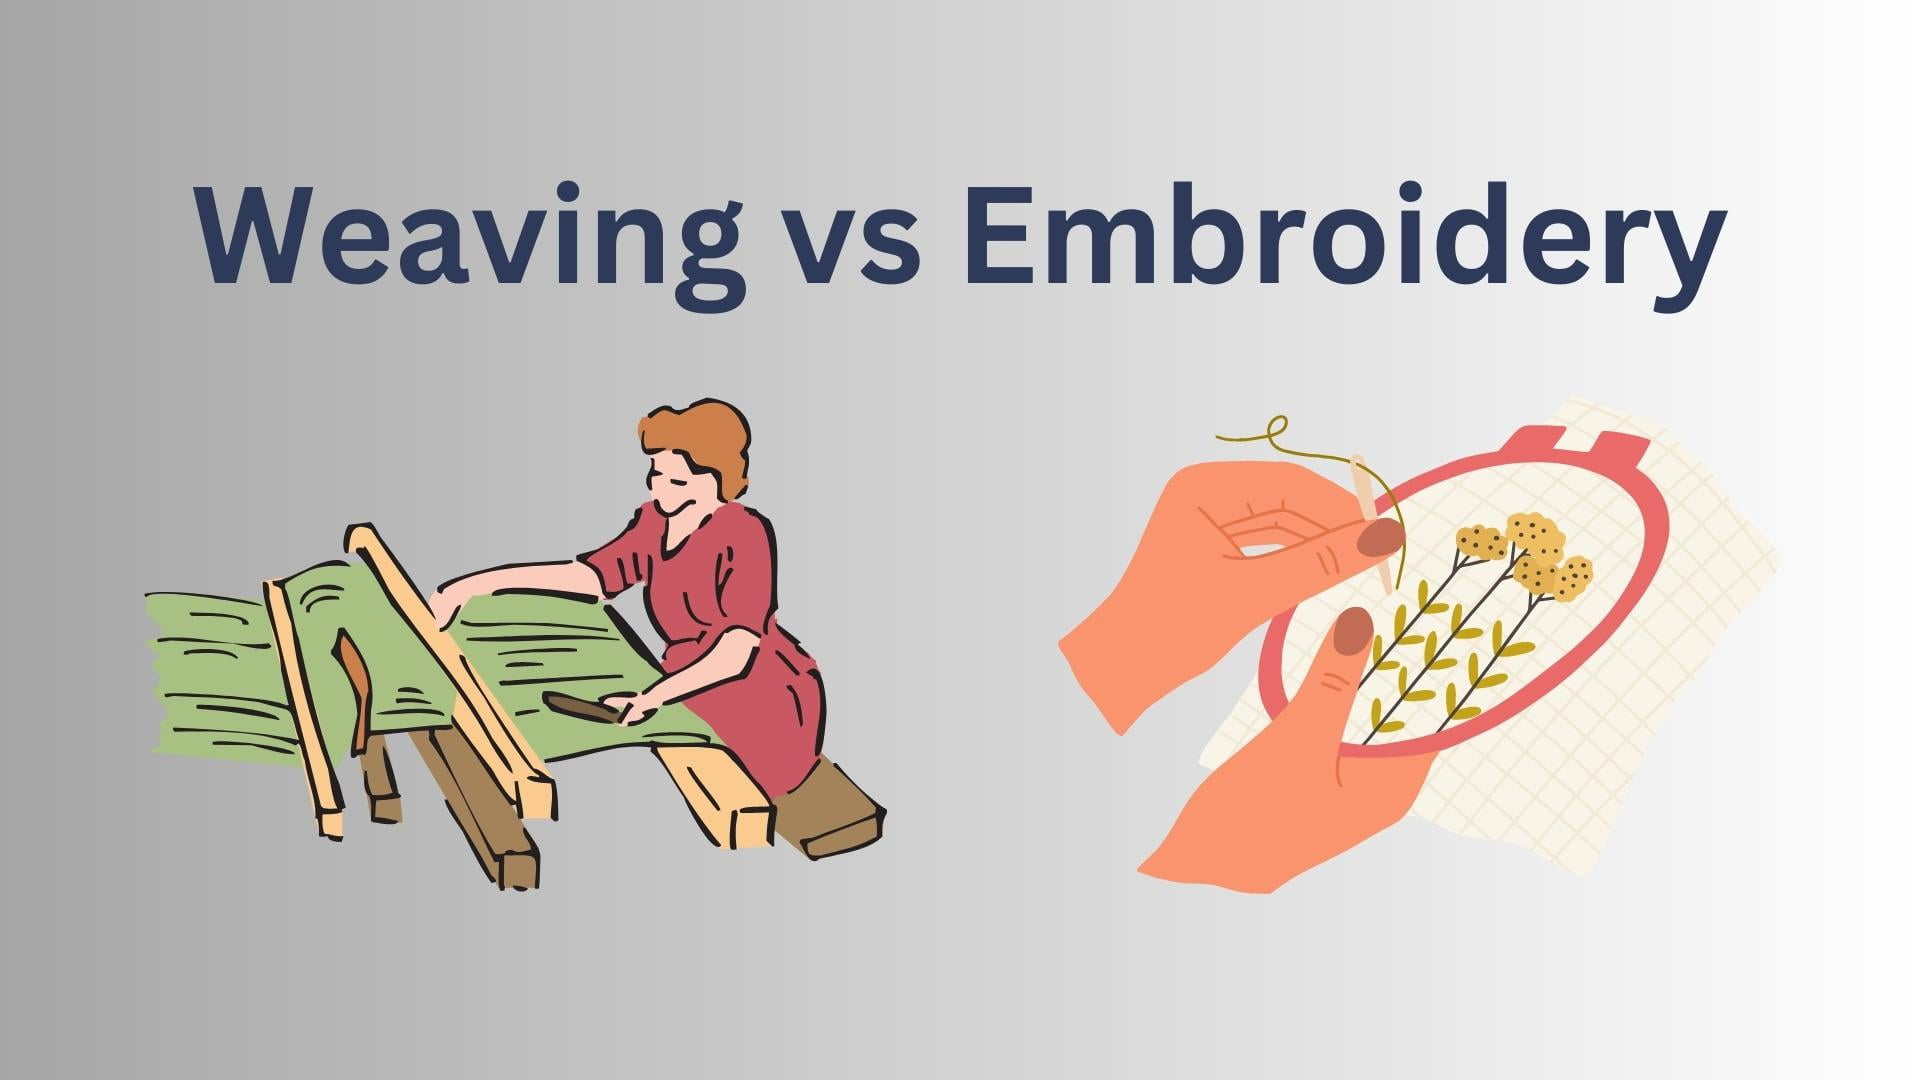 Explain the difference between weaving and embroidery